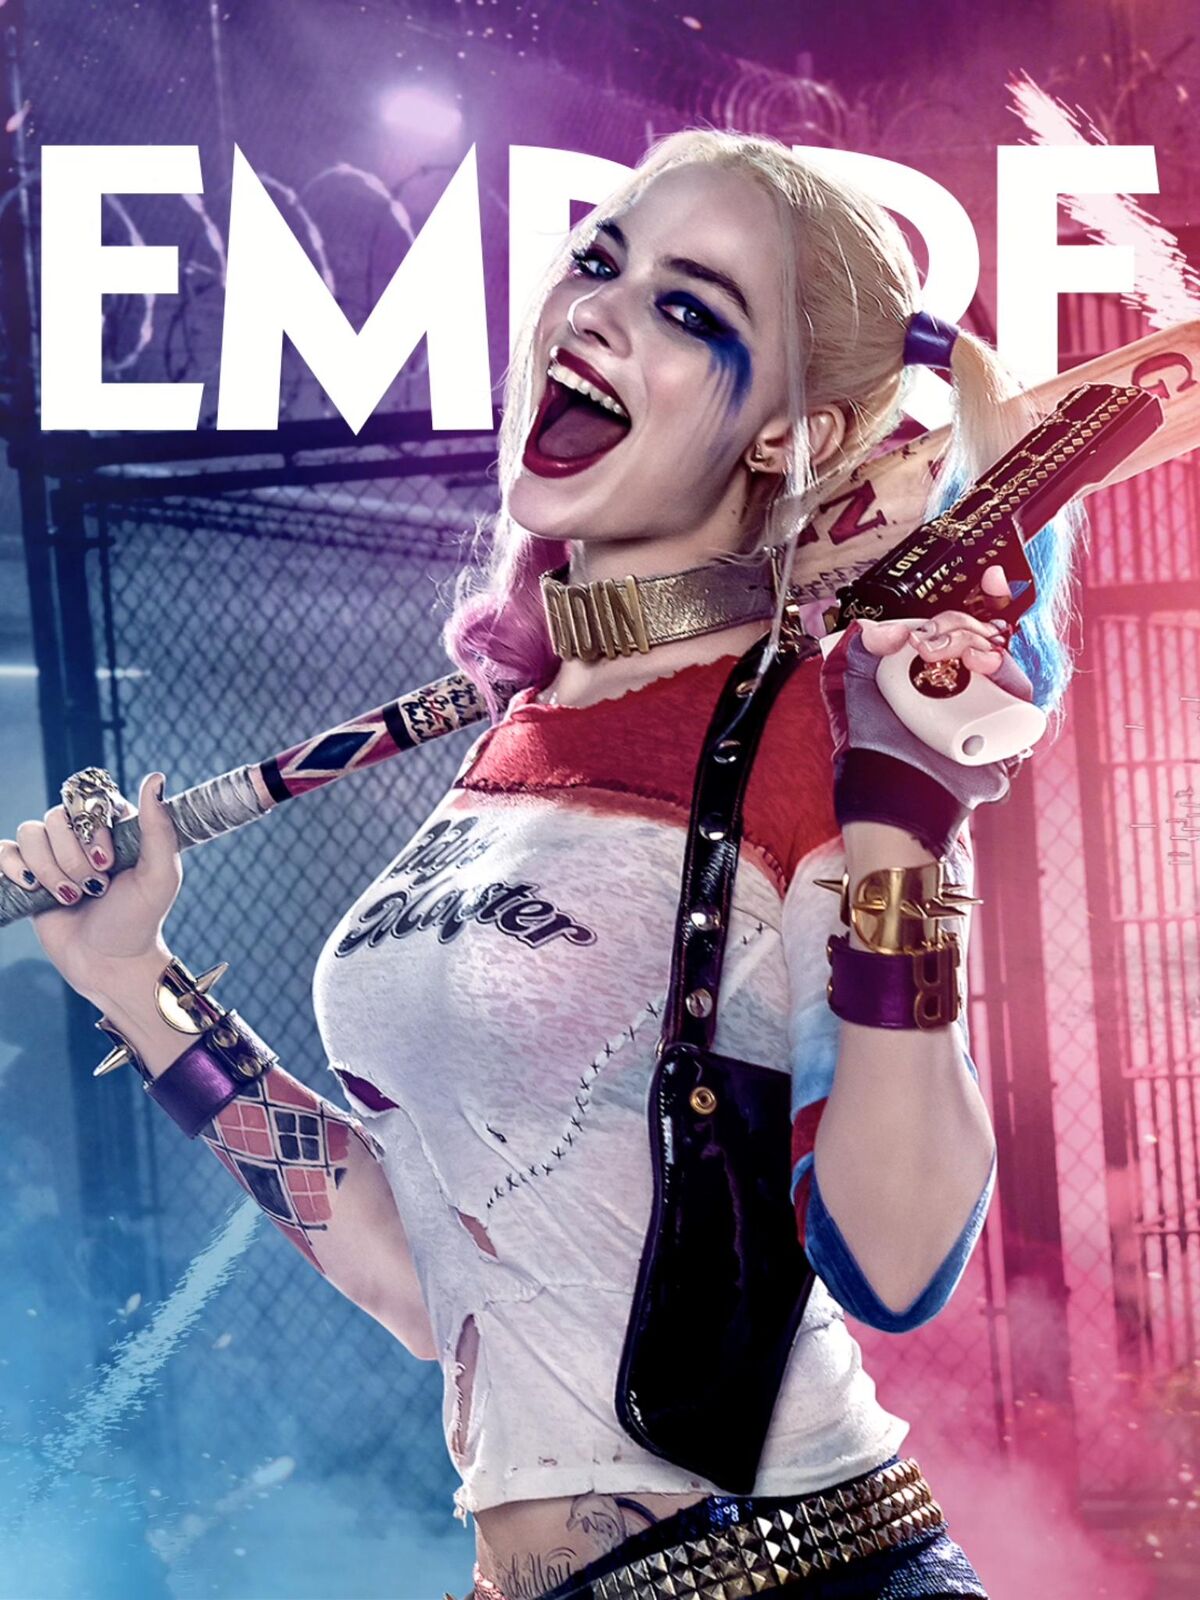 Report: Harley Quinn will lead DC film featuring female heroes and villains  - Polygon